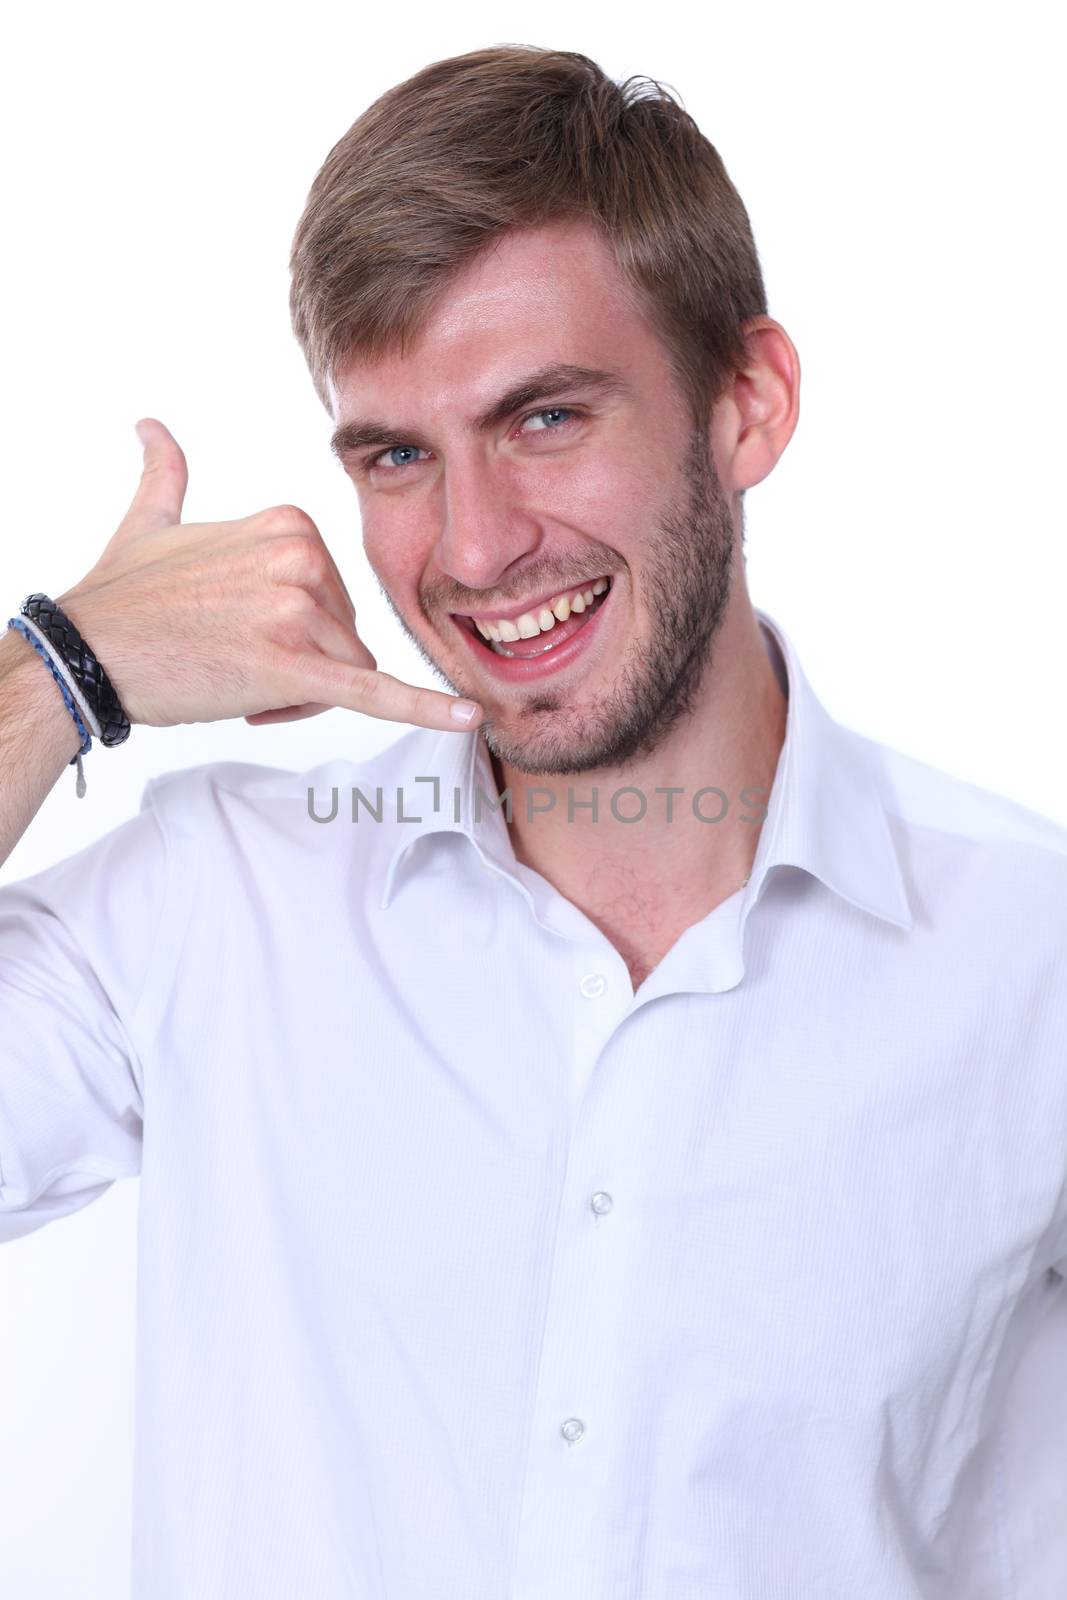 Young man using a call me gesture and a phone